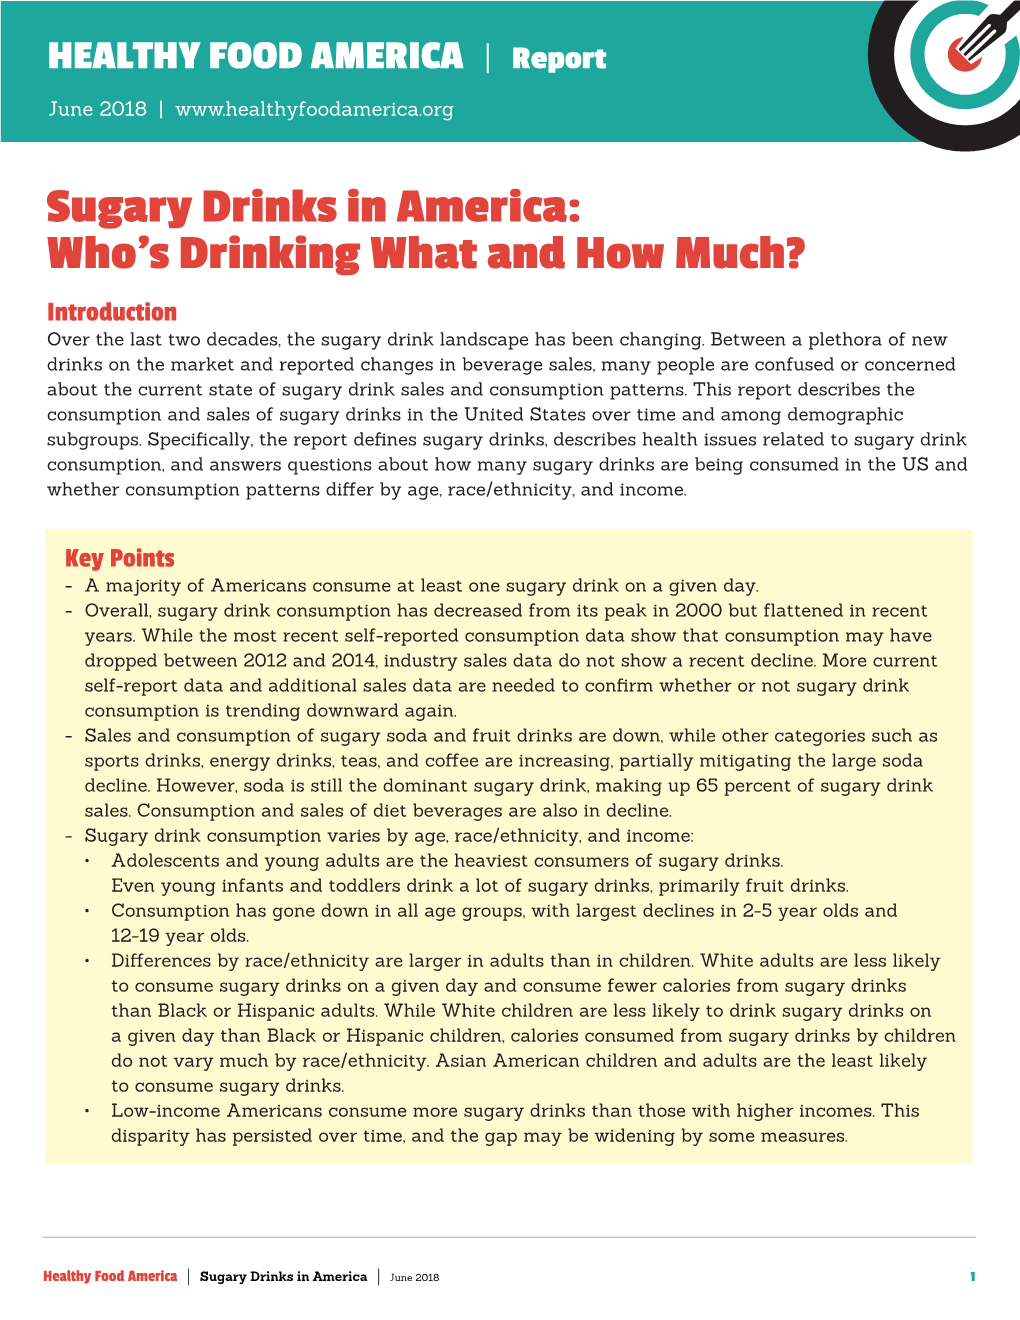 Sugary Drinks in America: Who's Drinking What and How Much? Introduction Over the Last Two Decades, the Sugary Drink Landscape Has Been Changing